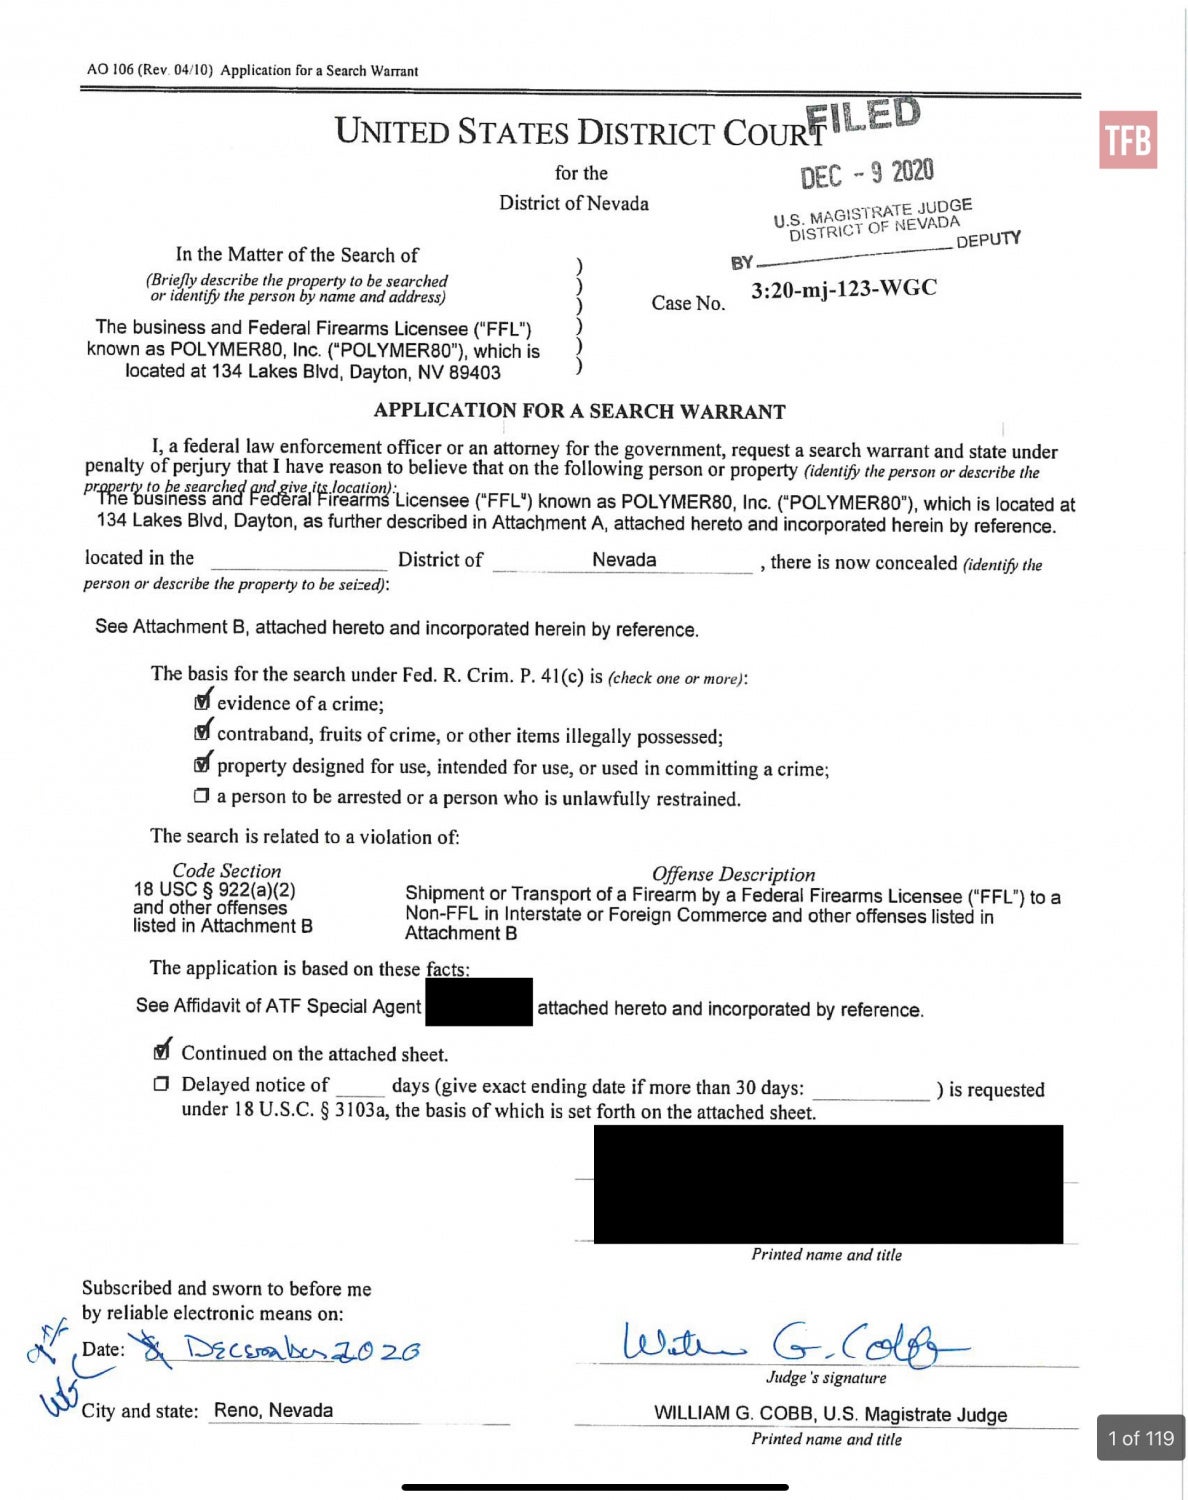 Polymer80 Warrant - Handguns, Customer Records, Prohibited Persons